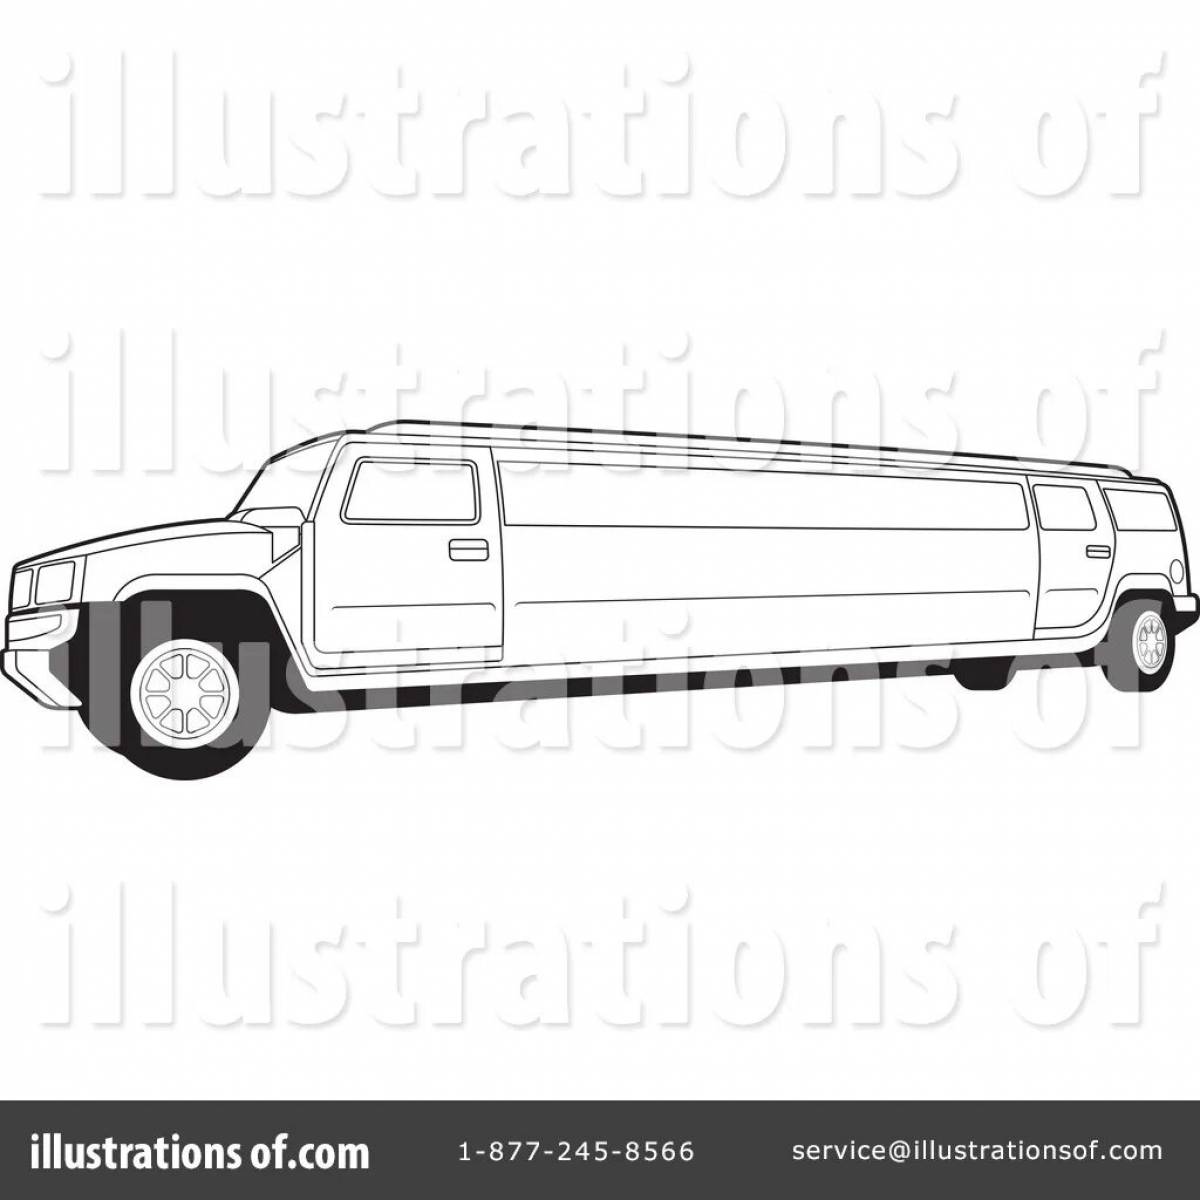 Amazing limousine coloring book for kids